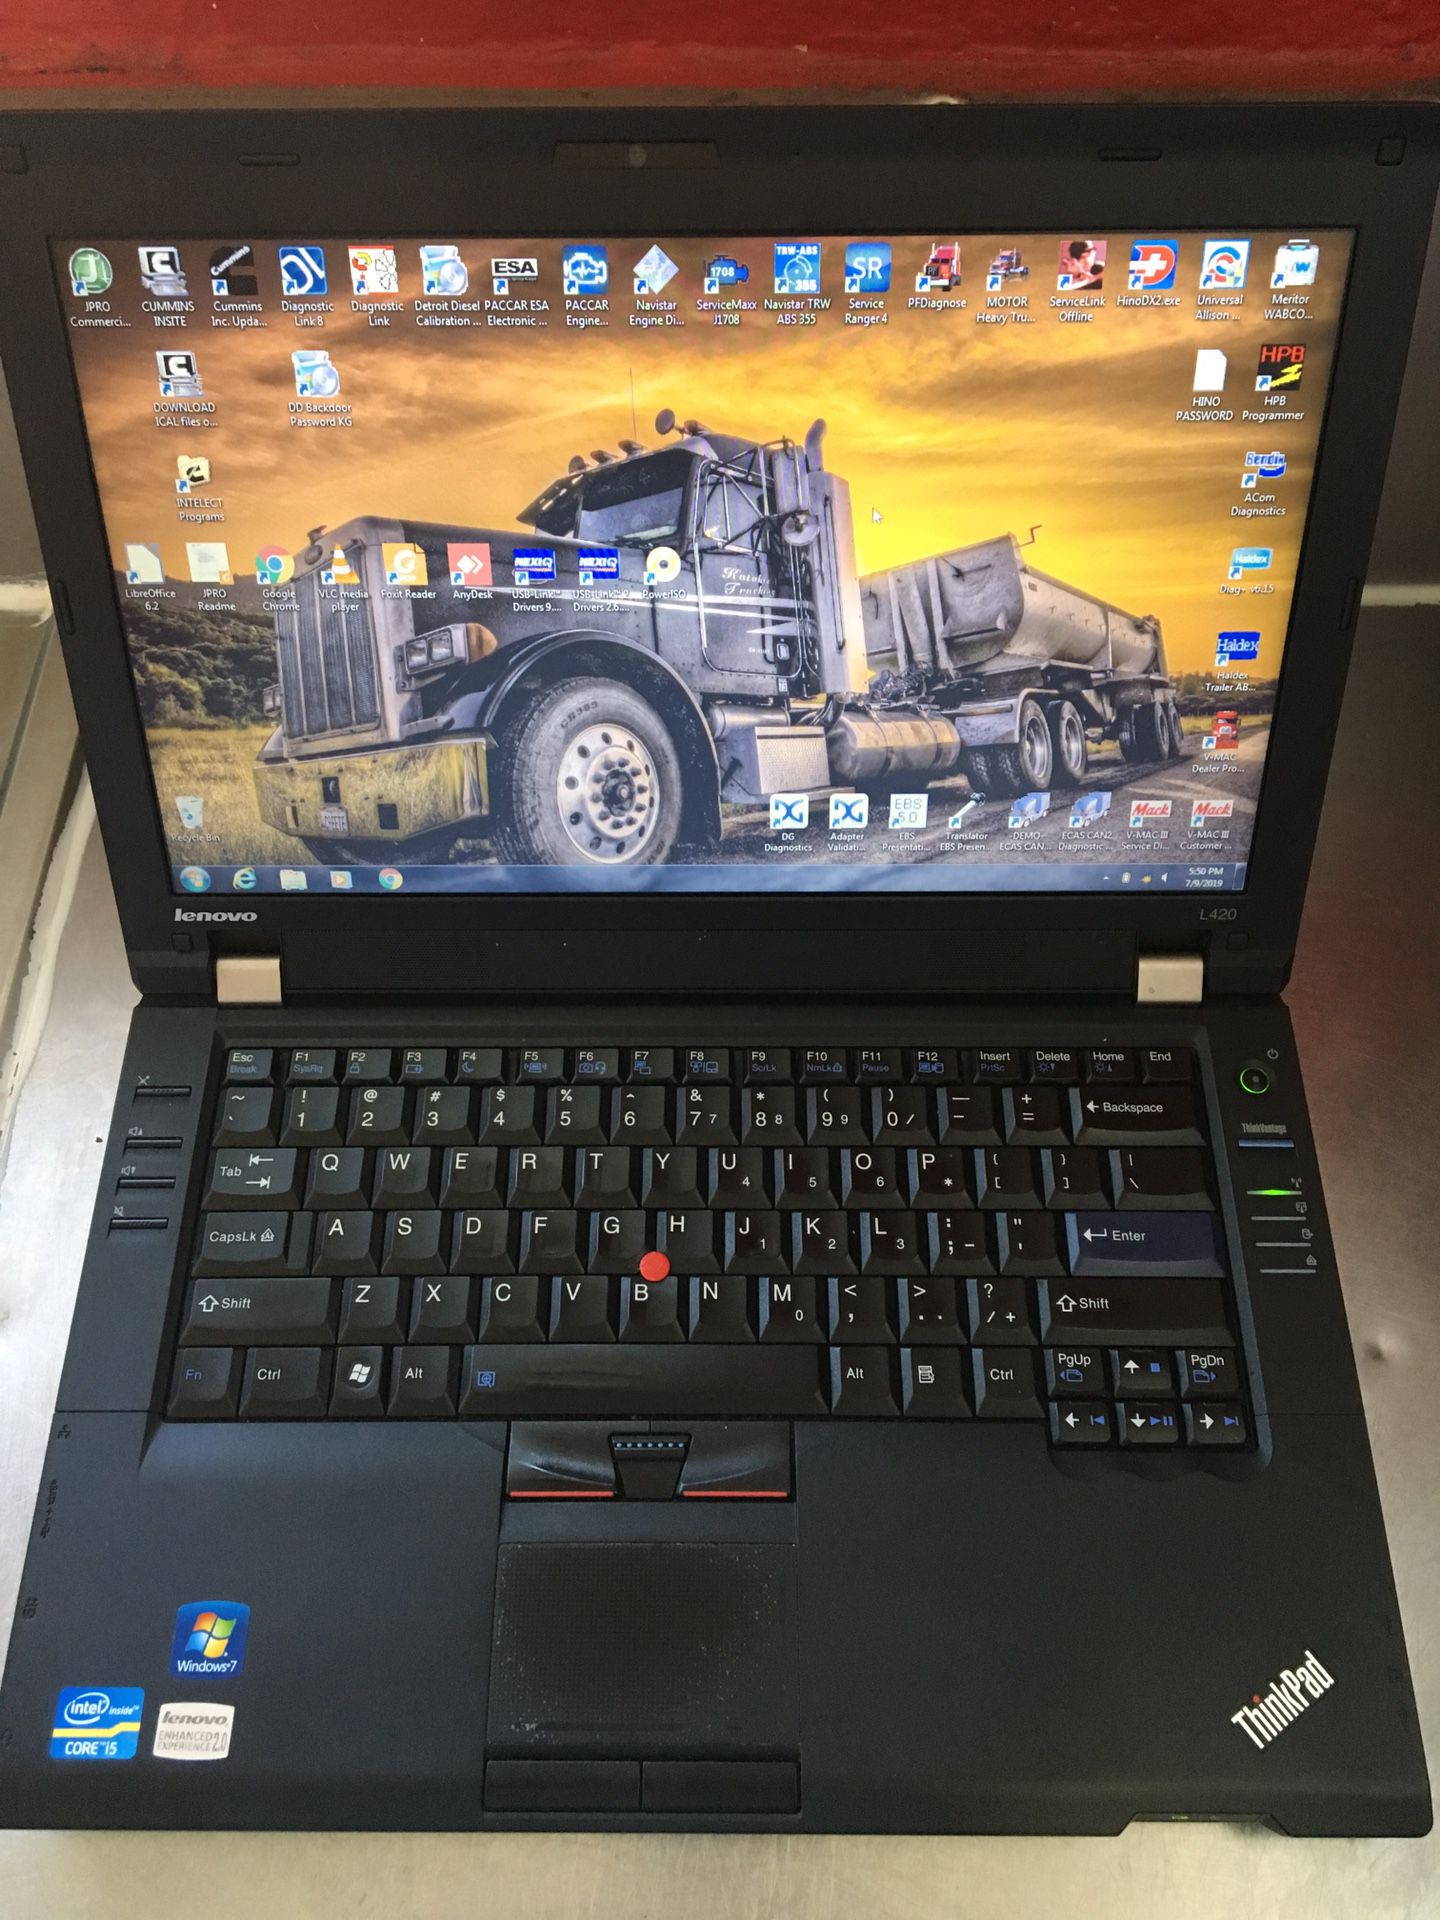 DIESEL TRUCK DIAGNOSTICS SCANNER LAPTOP THE MOST UP TO DATE SOFTWARE 2017-2019 THI IS THE REAL DEAL NO BS 100% NO EXPIRATION DATE ON SOFTWARE